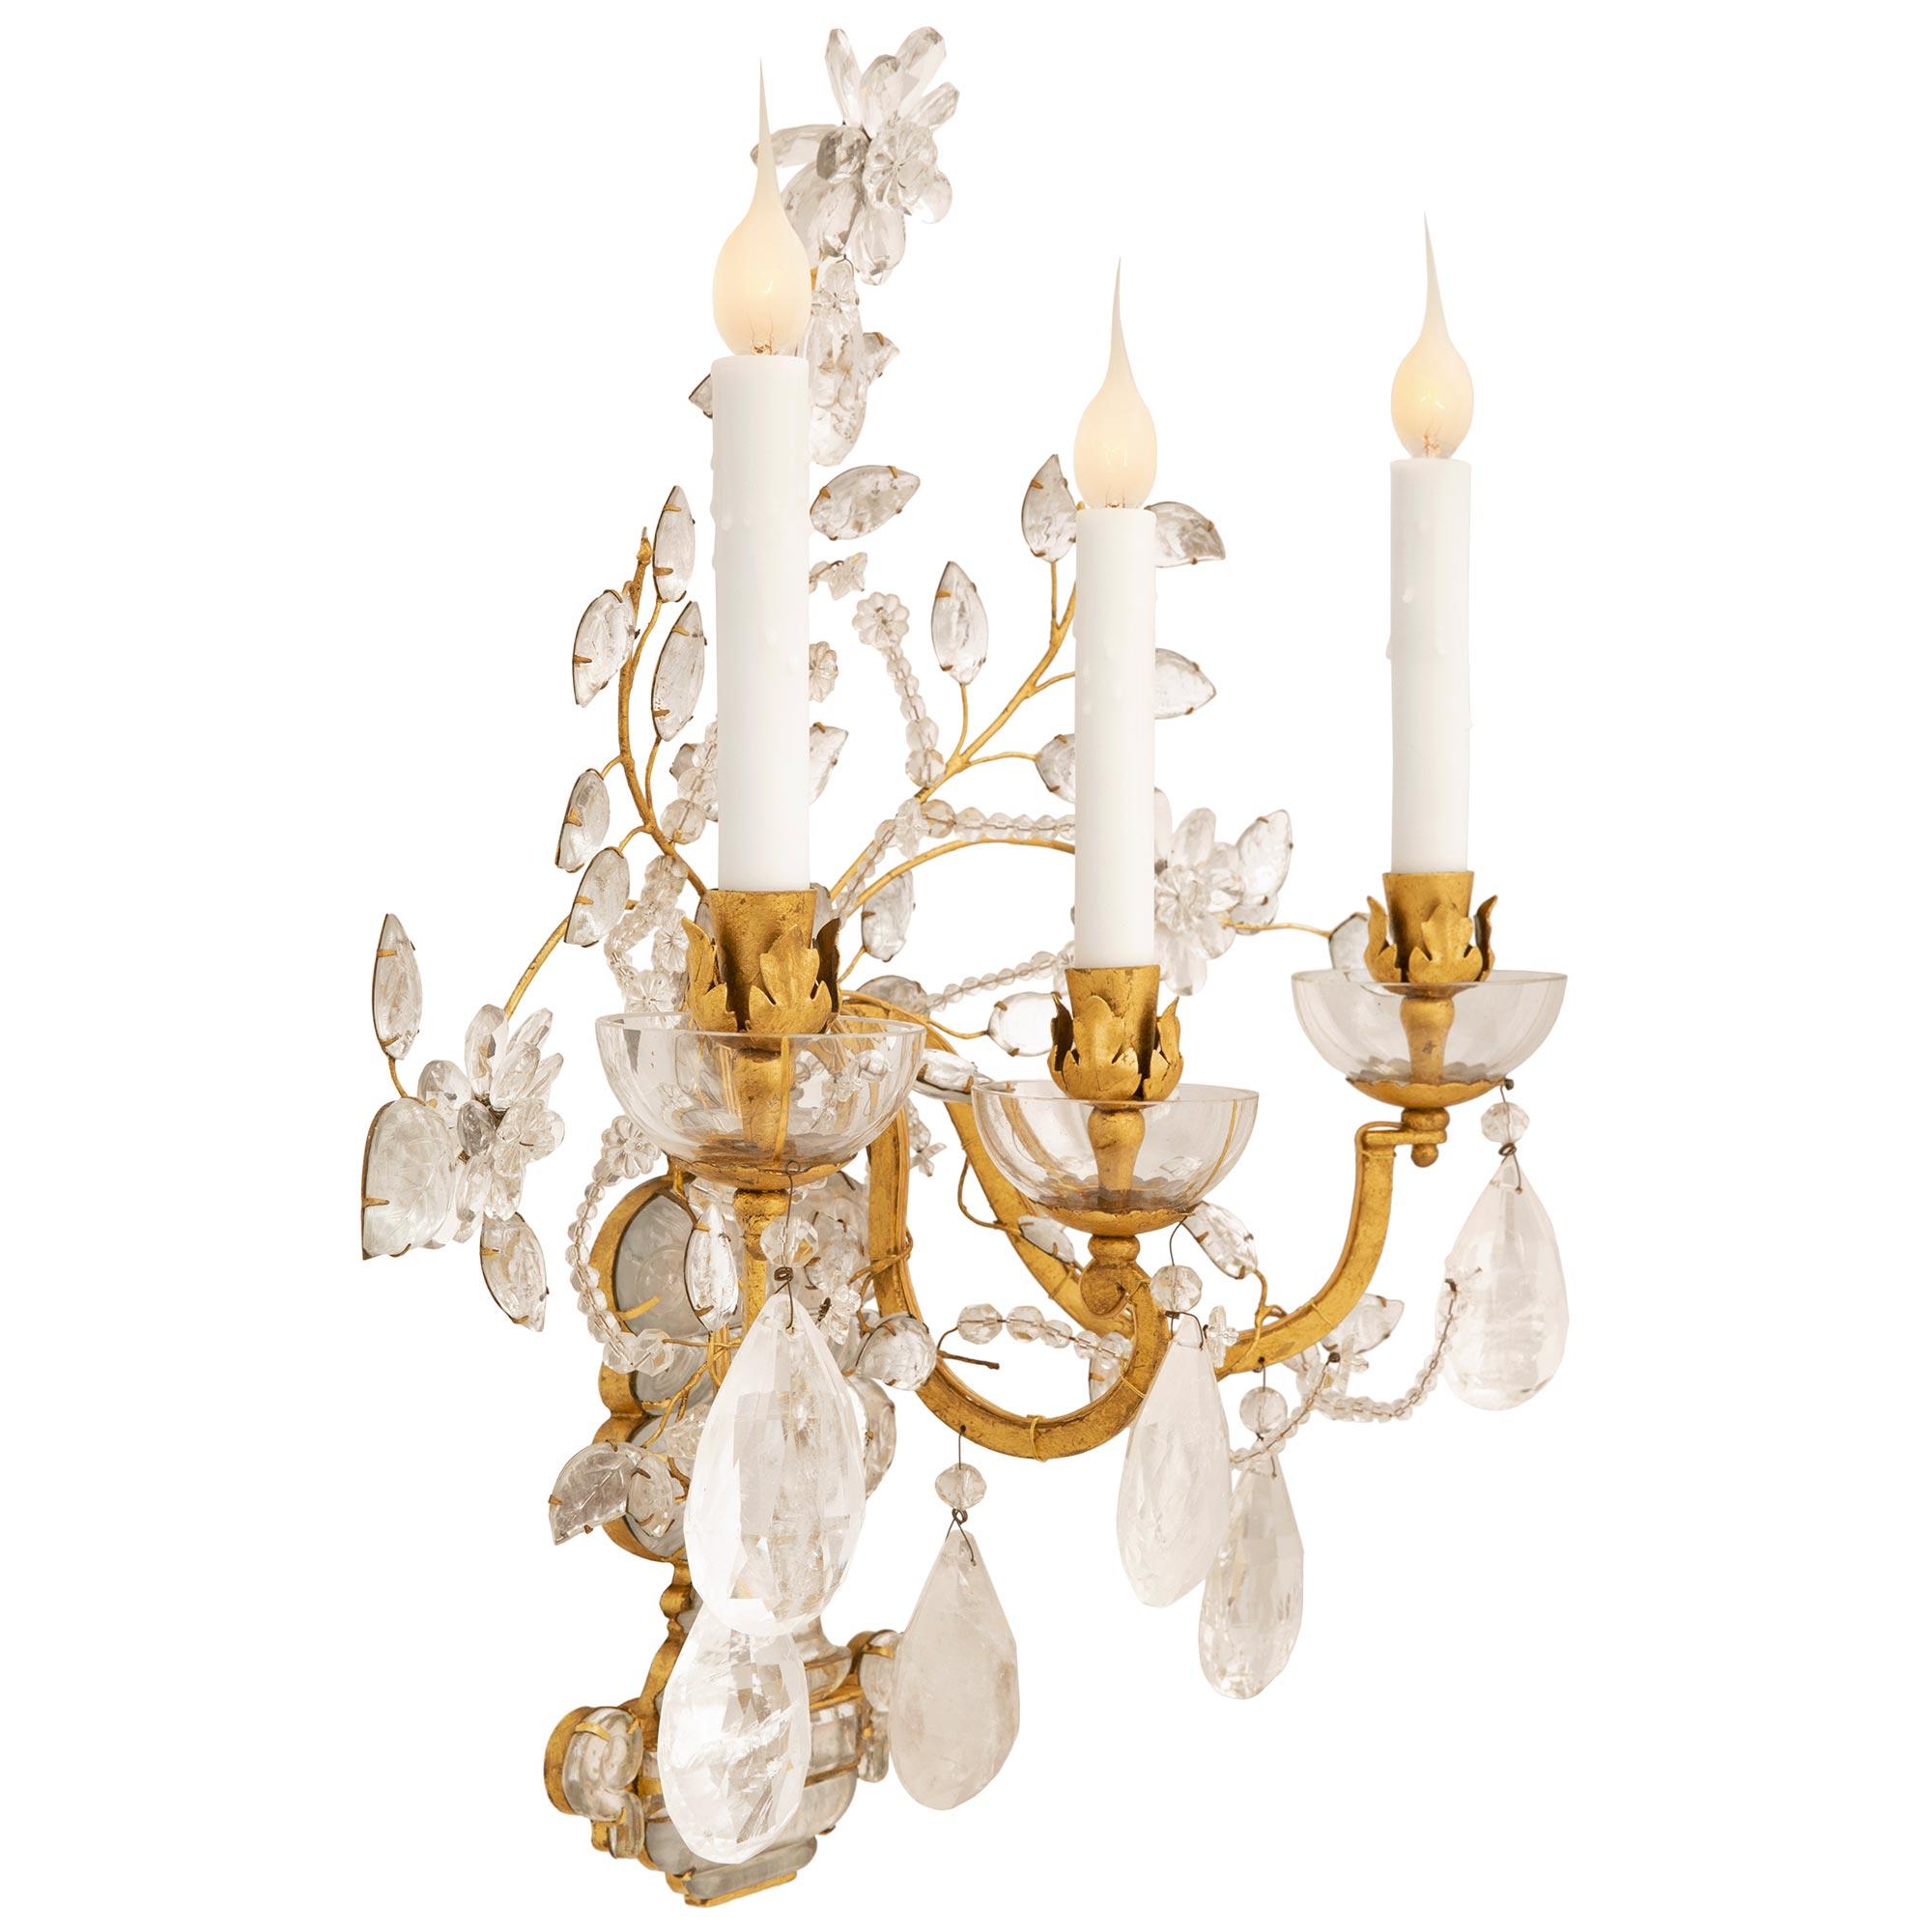 A stunning large scale true pair of French turn of the century Louis XVI st. Crystal, Rock crystal and Gilt metal sconces, attributed to Maison Bagues. Each three arm sconce is centered by an spectacular extremely decorative rock crystal urn with